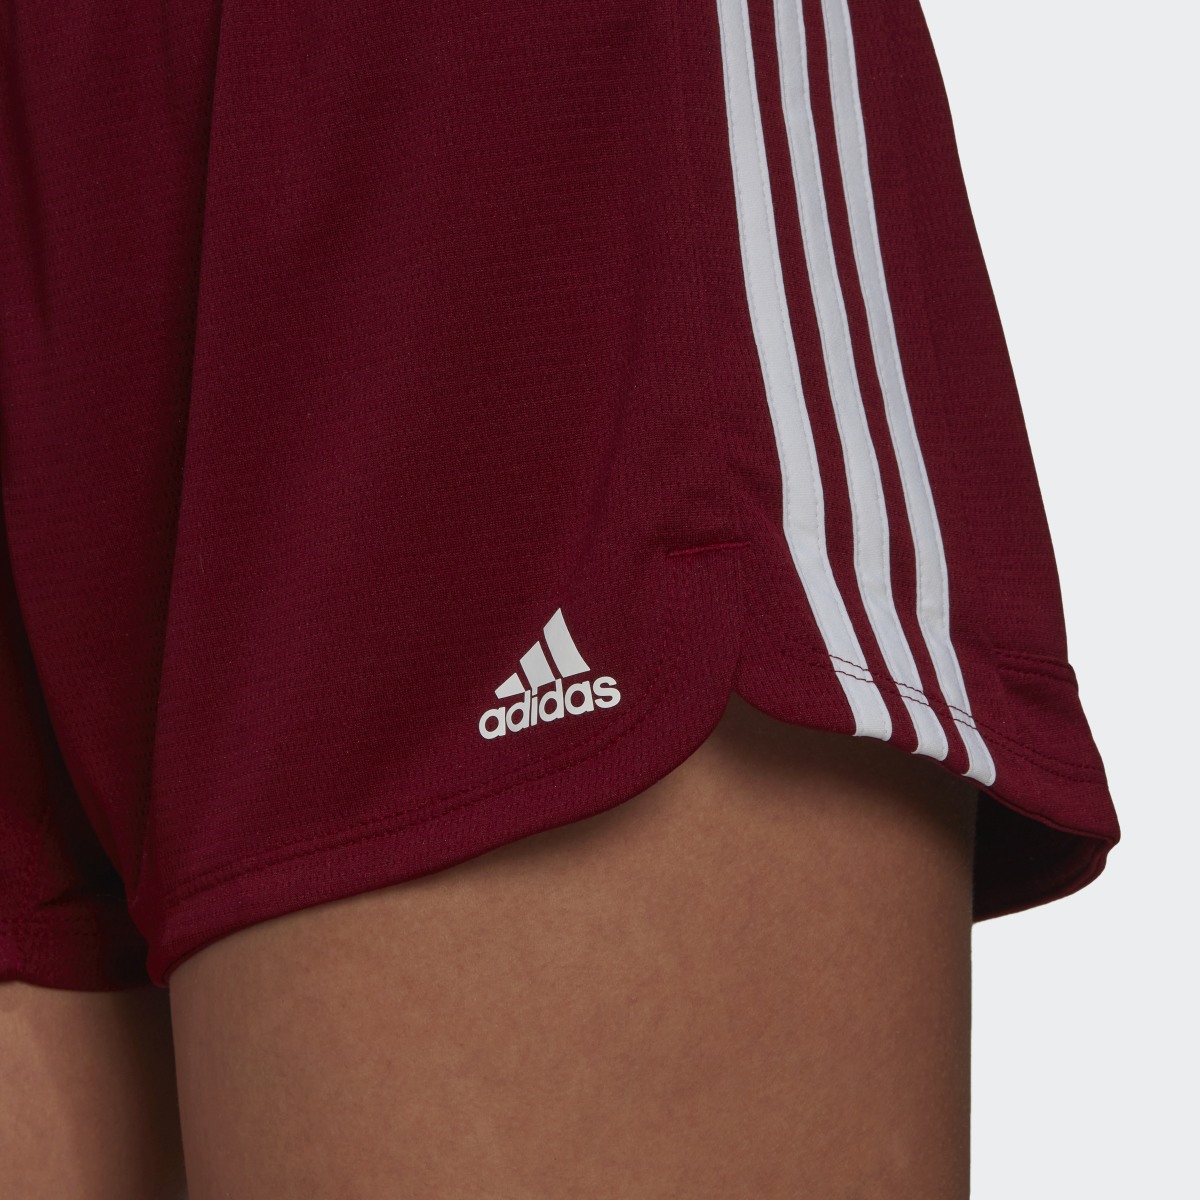 Adidas Pacer 3-Stripes Knit Shorts. 6